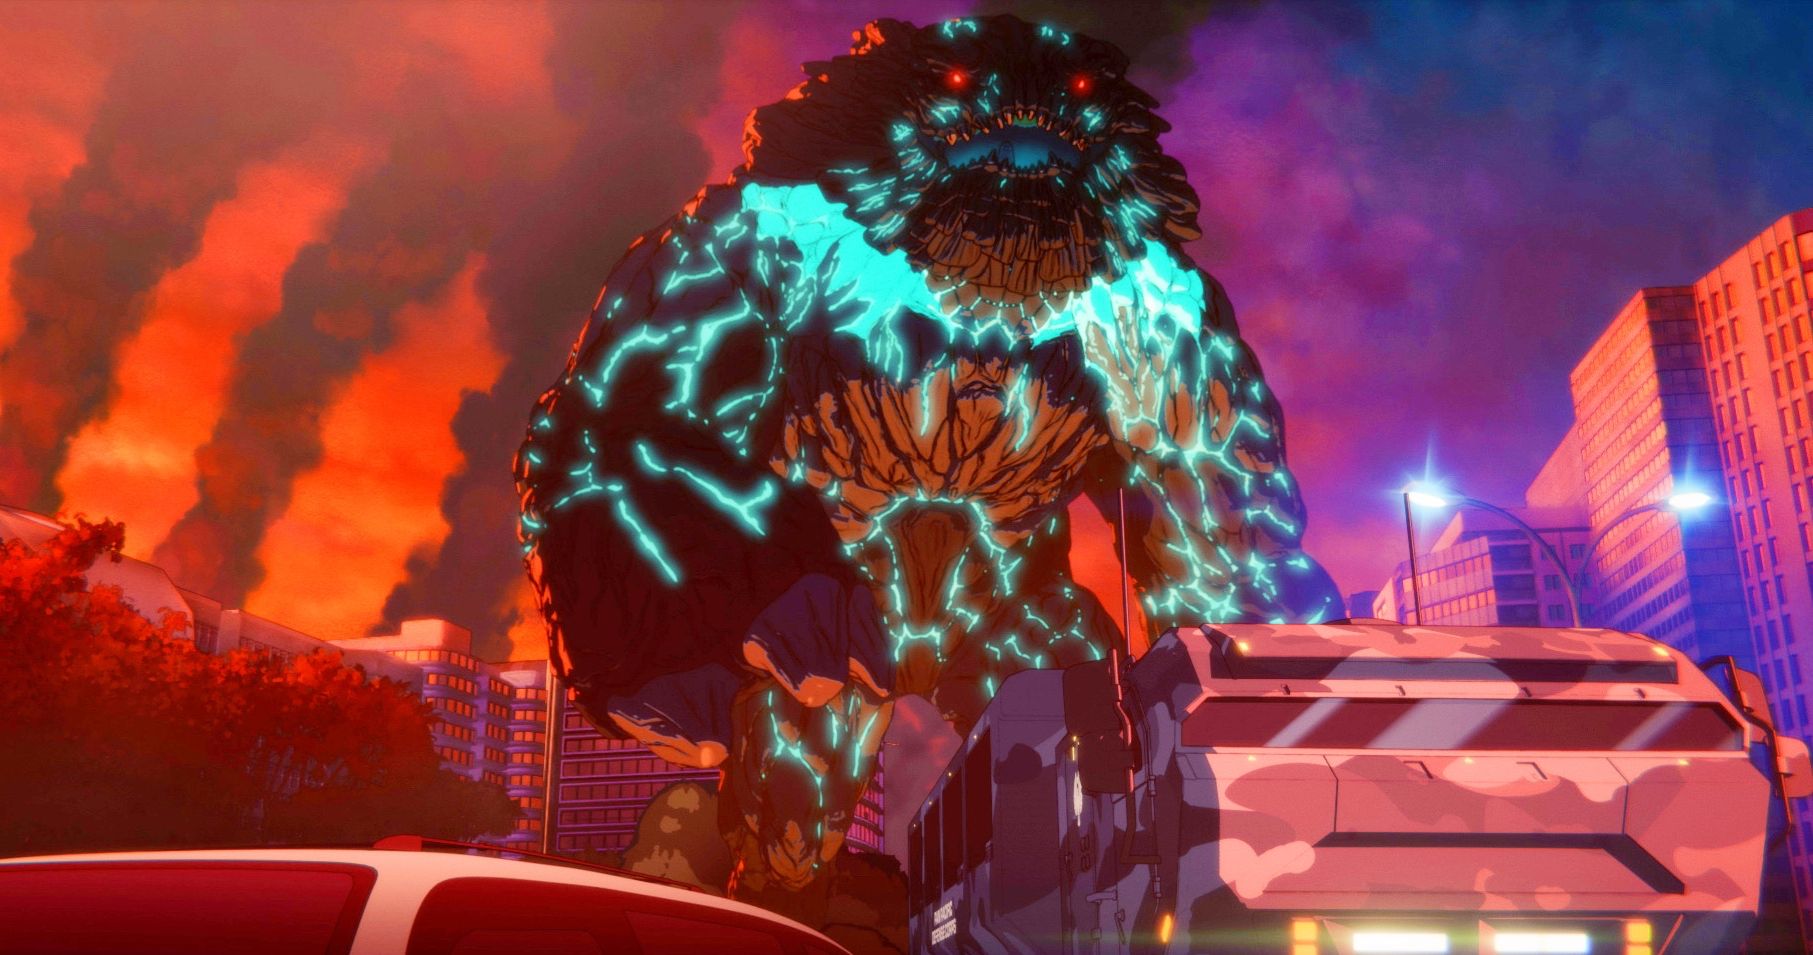 Pacific Rim Anime Series First Look Brings the Kaiju Fight to Netflix